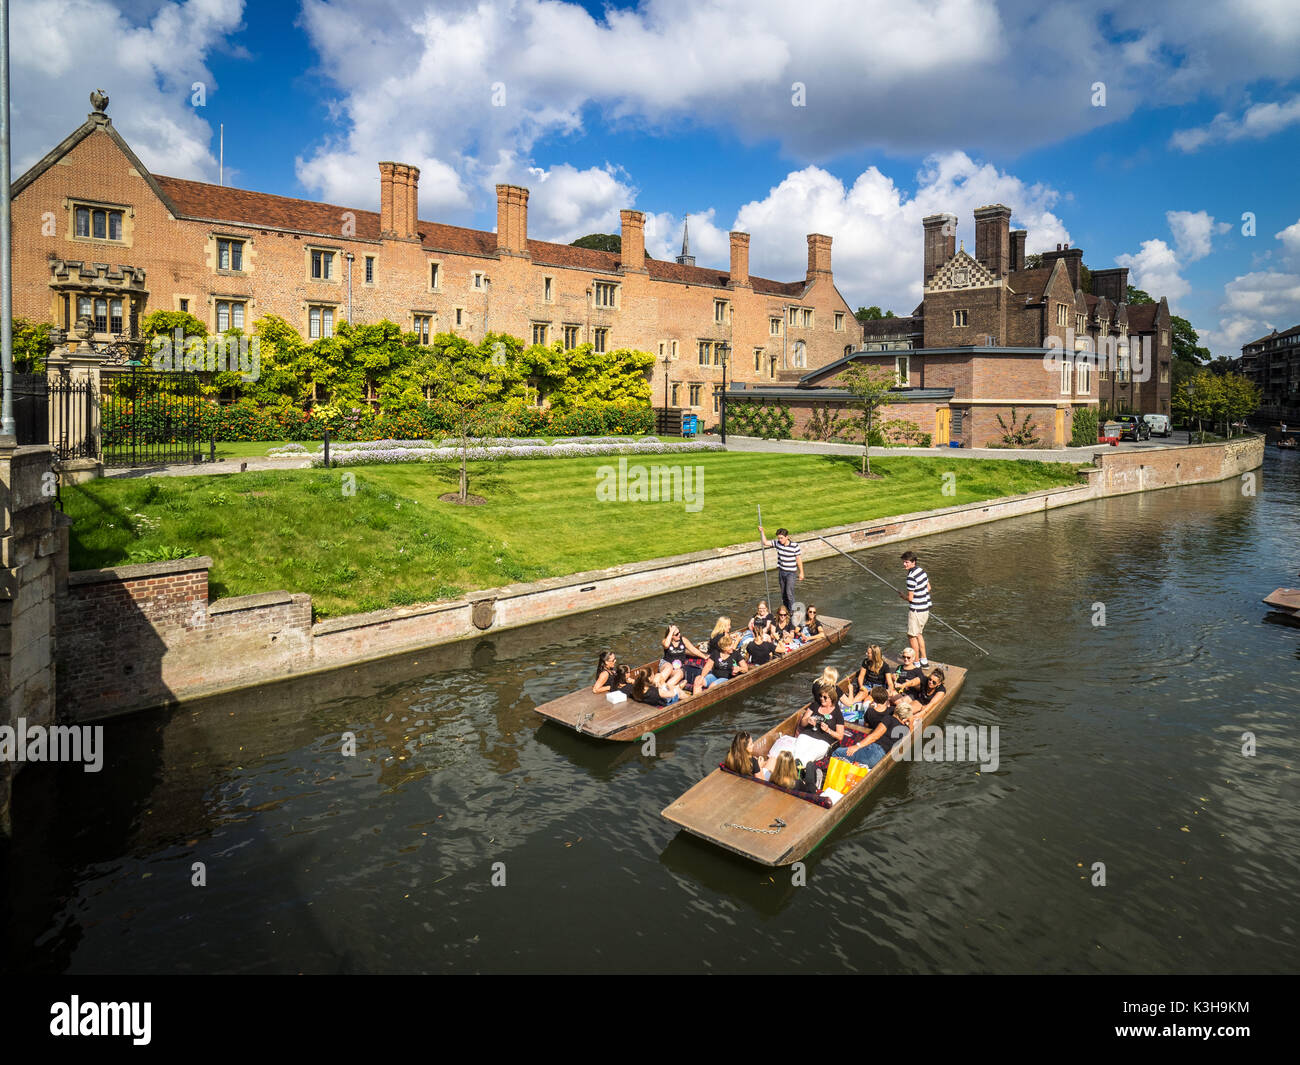 Cambridge Tourism - Tourists punting on the River Cam in front of Queen's College, part of the University of Cambridge, UK Stock Photo